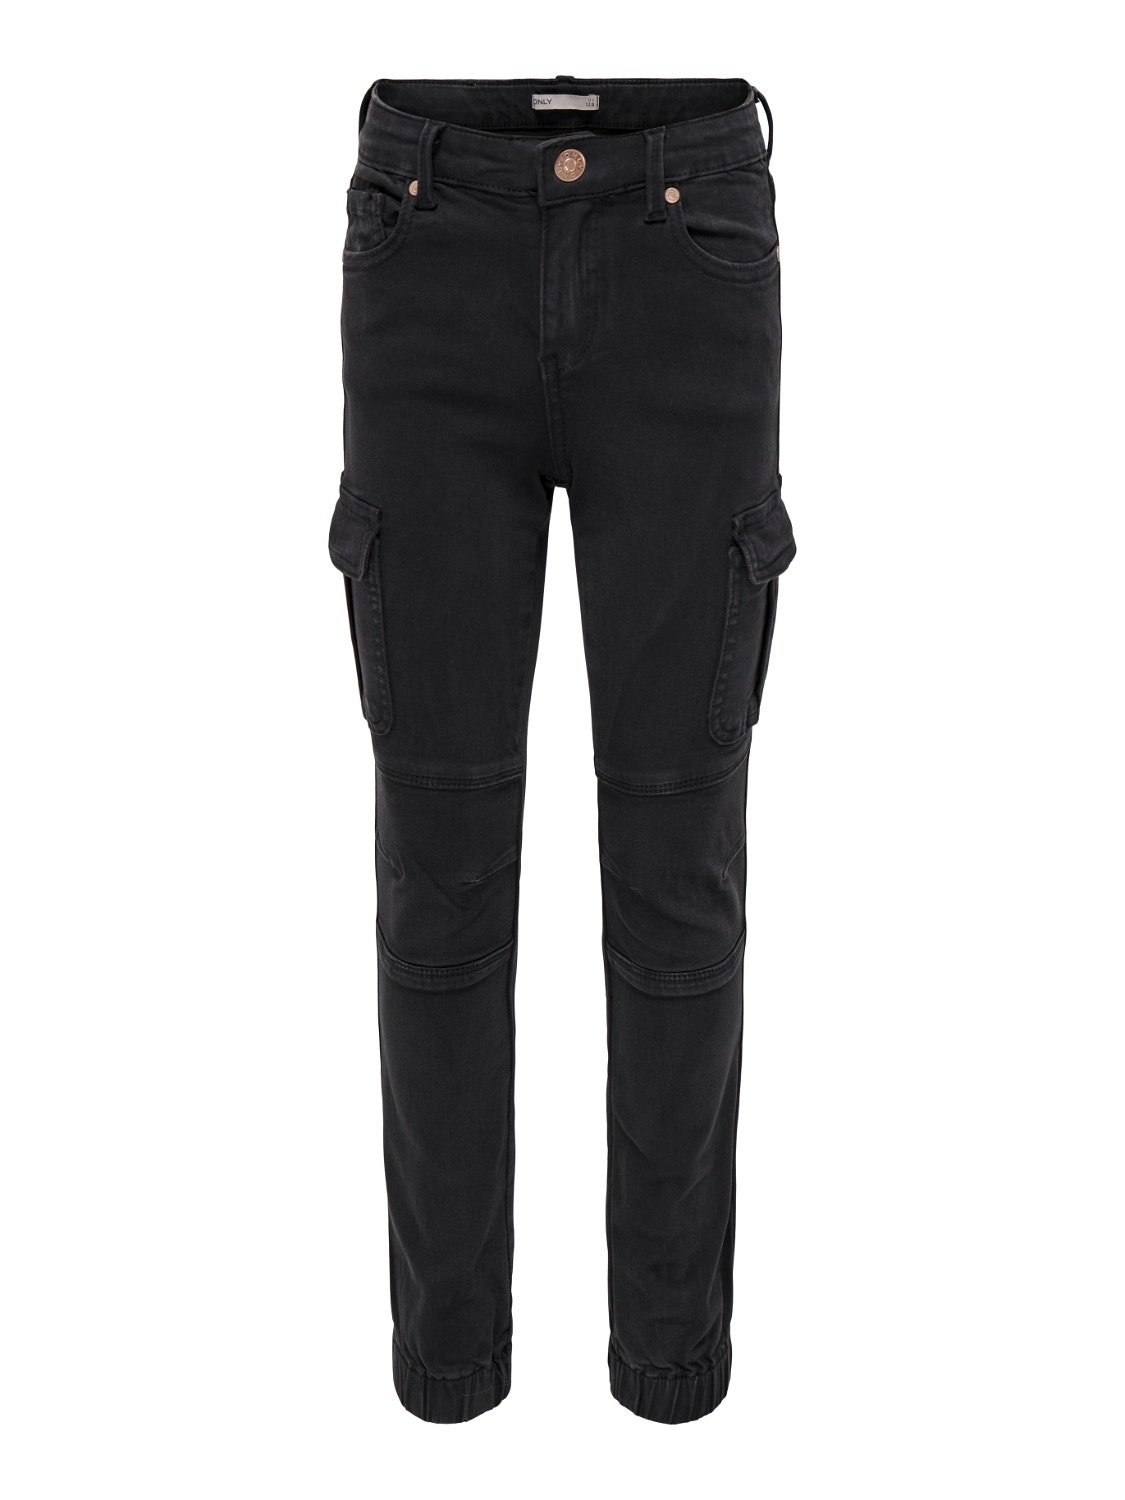 ONLY Slim Fit Elasticated hems Trousers -Black - 15221844